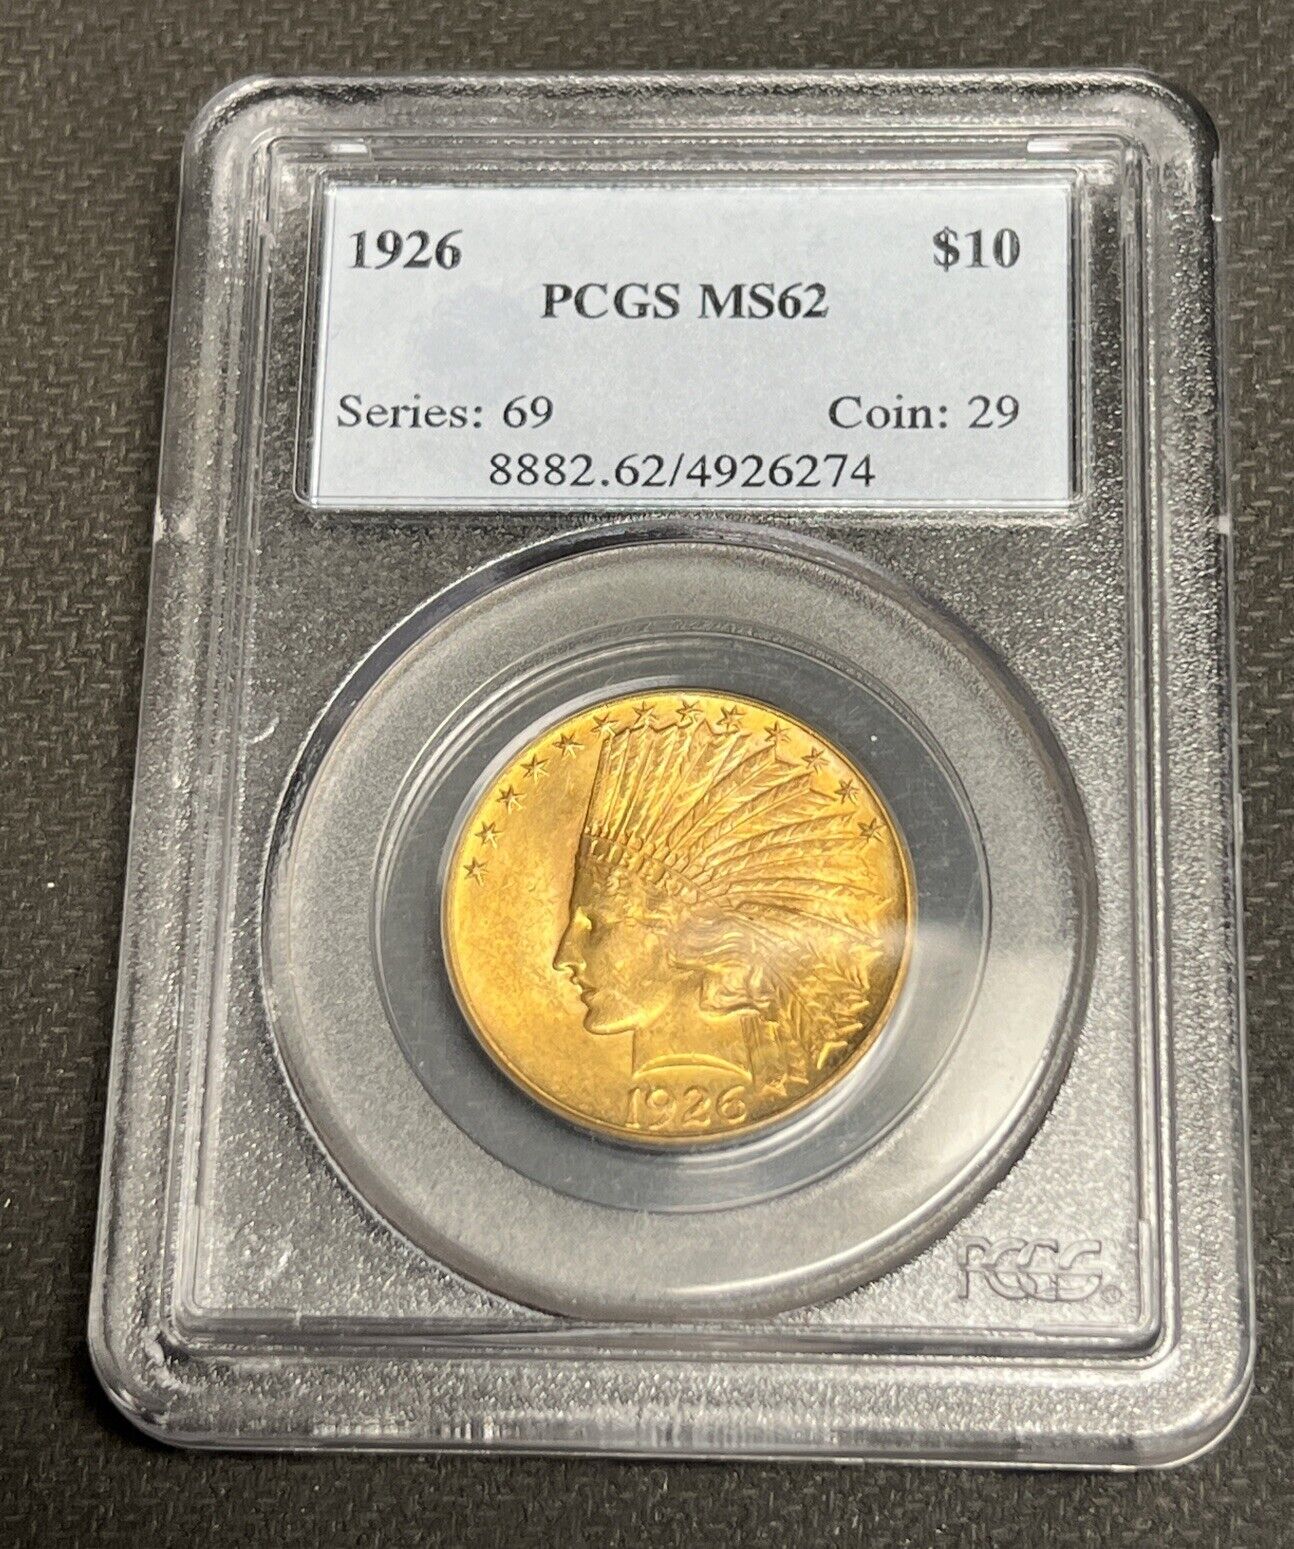 1926 PCGS MS62 Indian Head Gold $10 Eagle